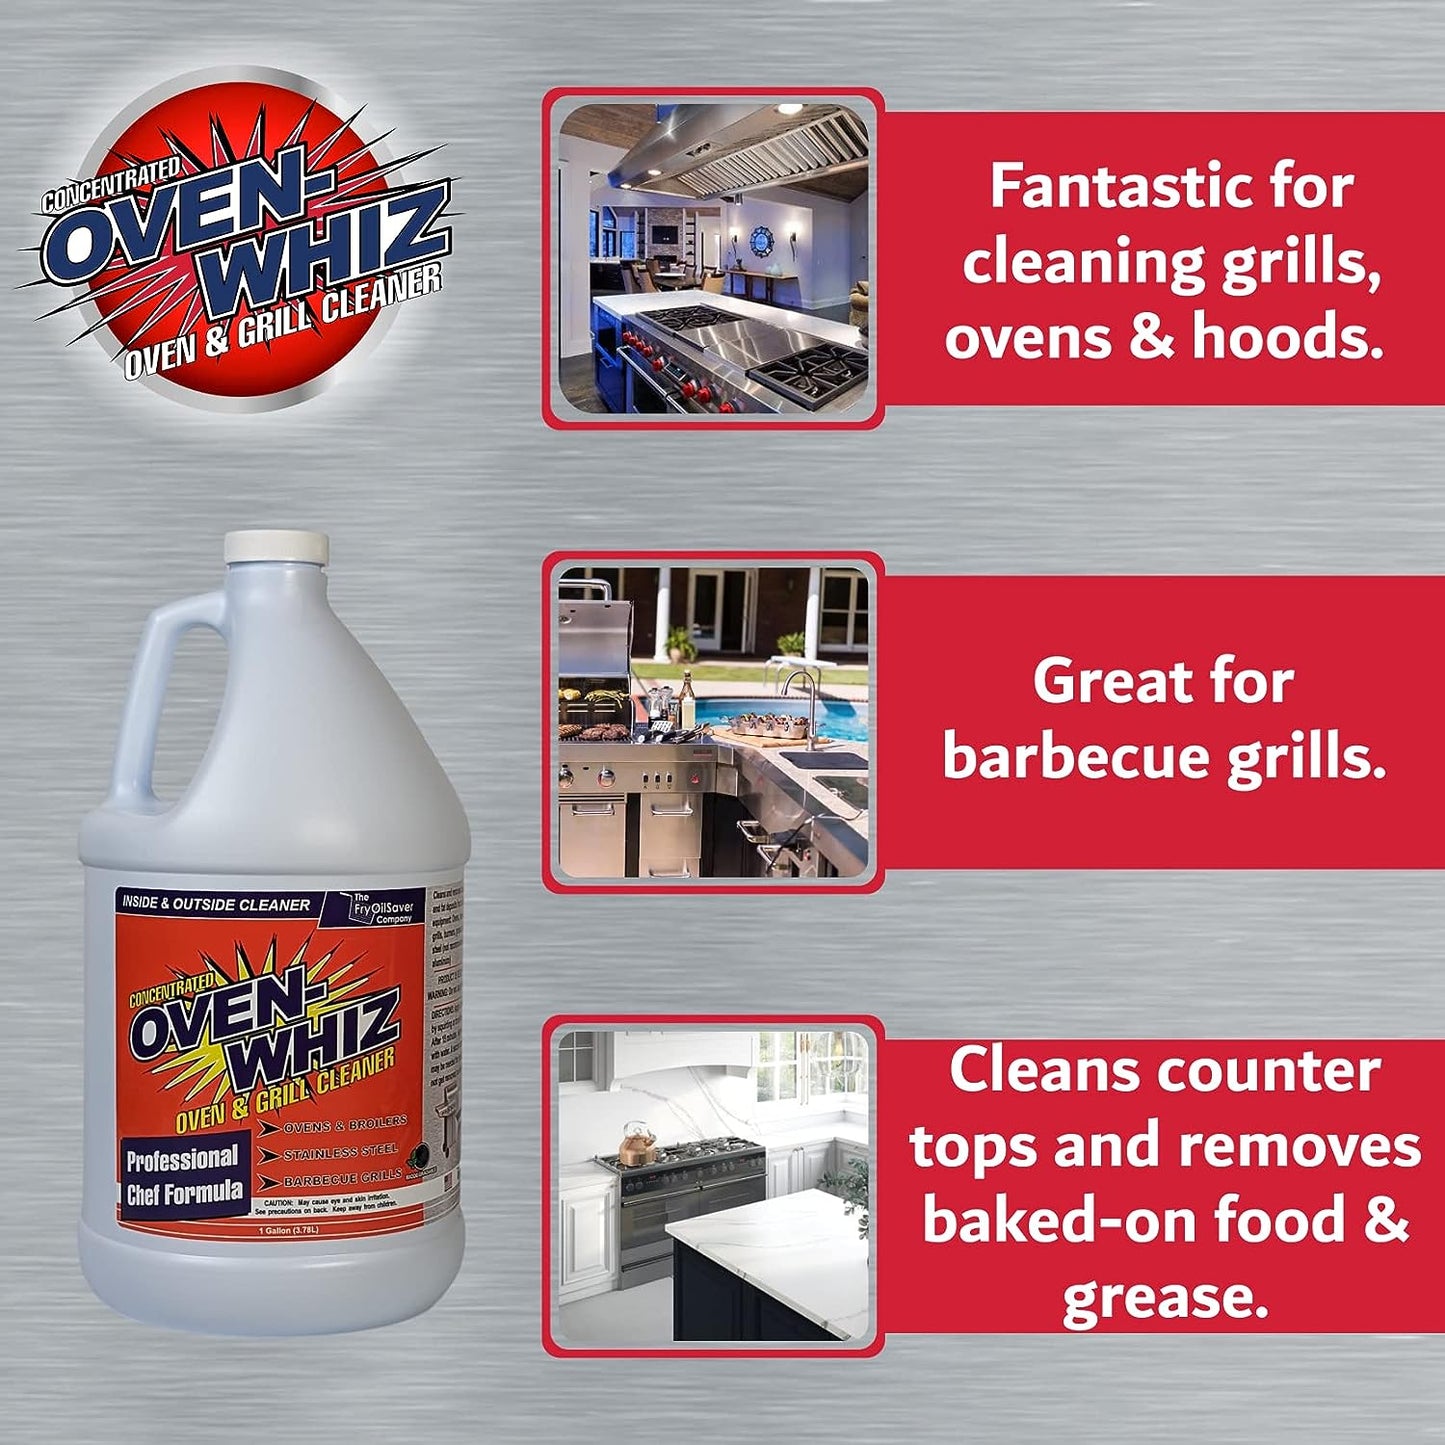 Oven Wiz Oven And Grill Cleaner 1 Gallon